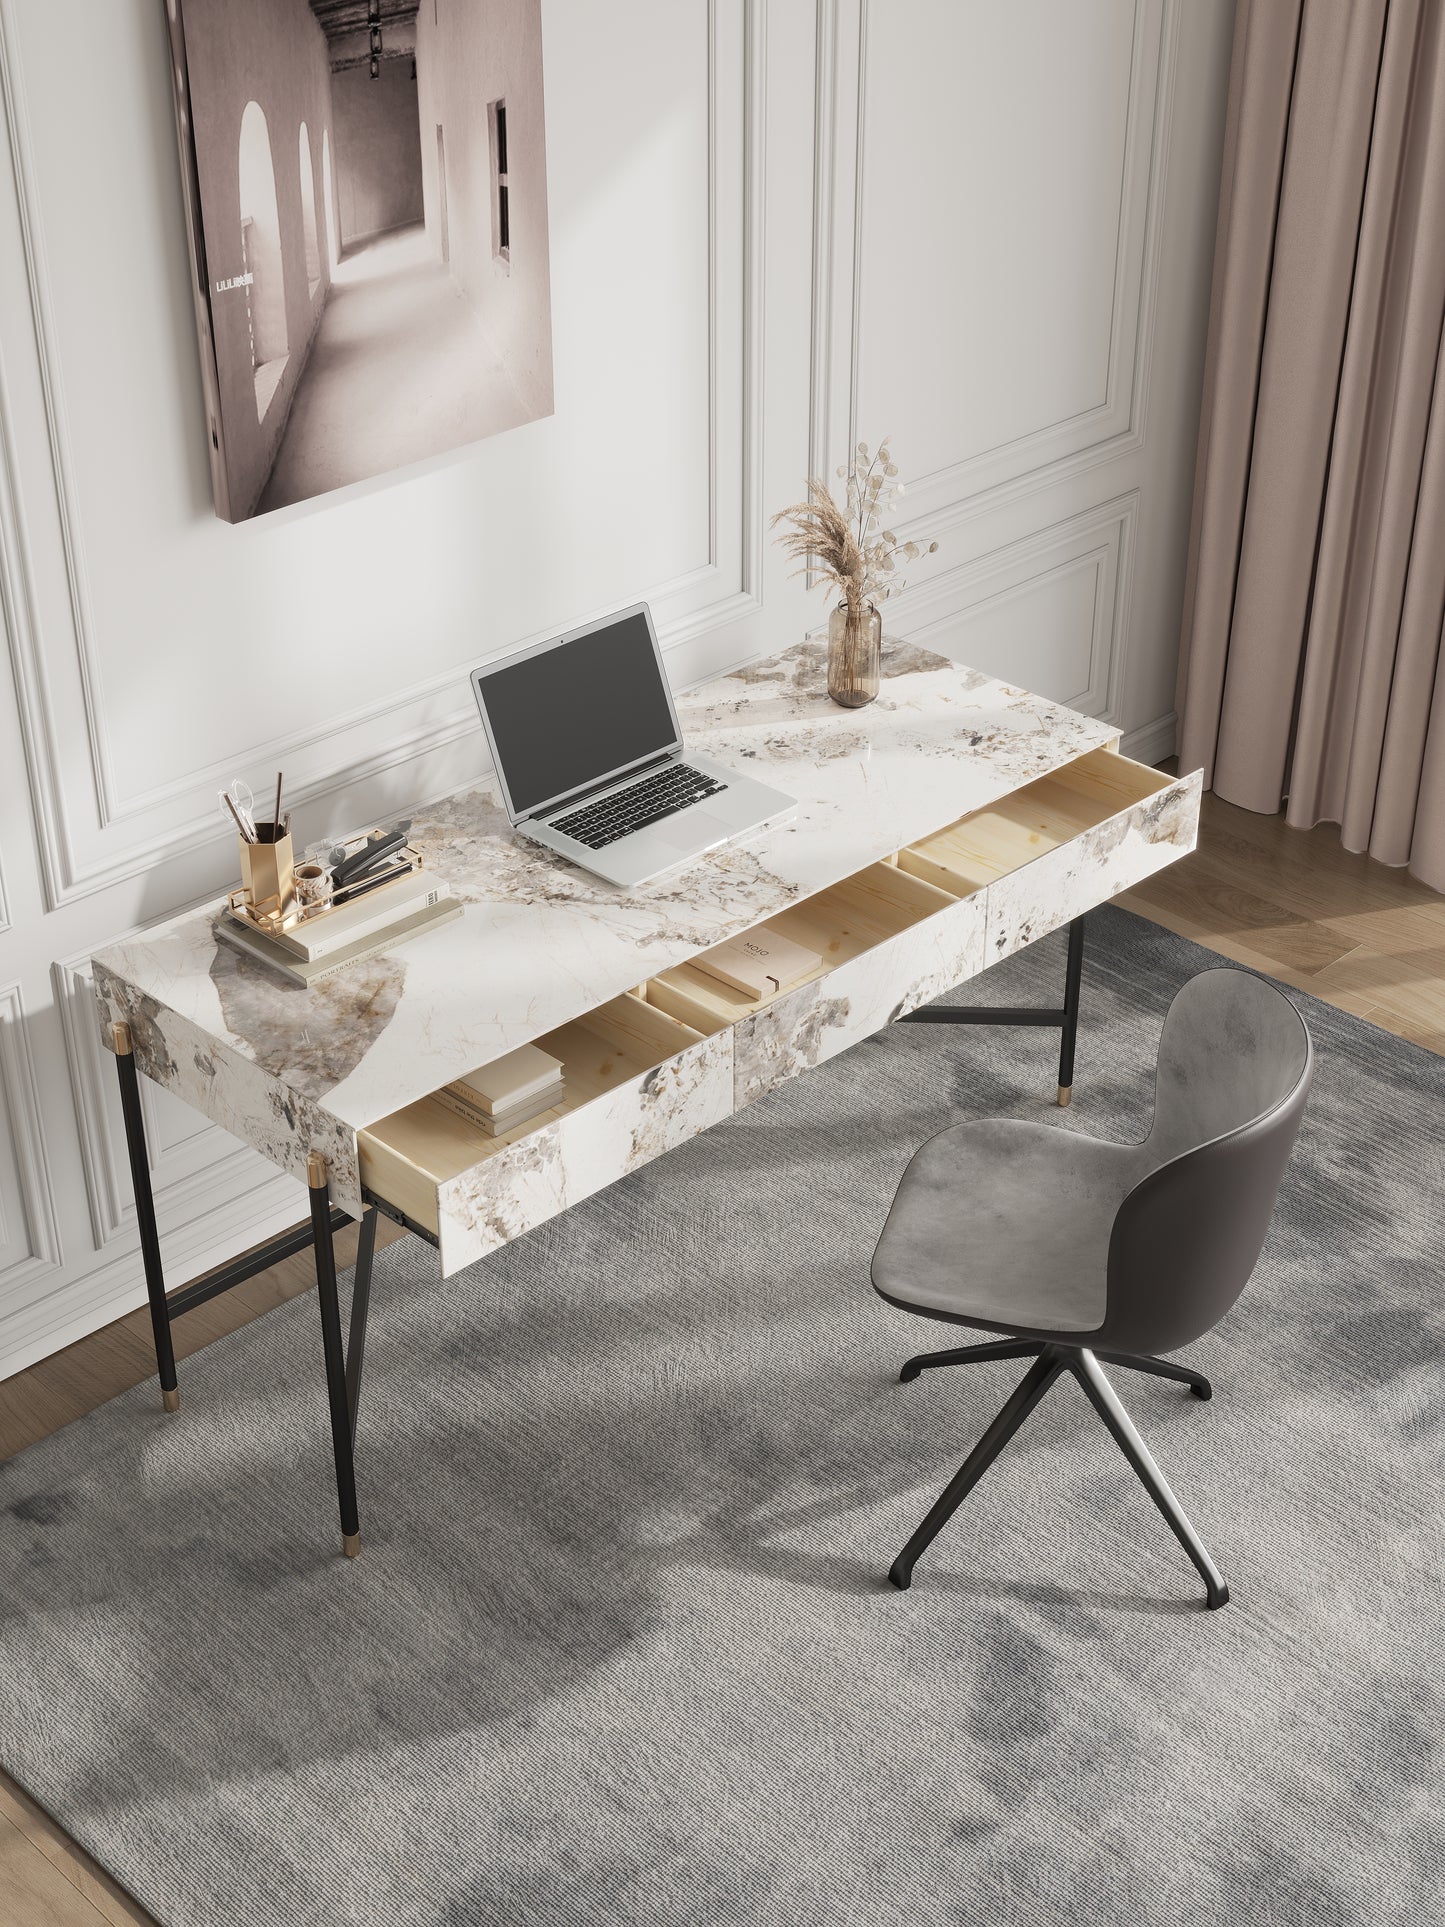 Igor Sintered Stone Top Study Desk With Drawers Steel Legs Home Office Desk 1.4m